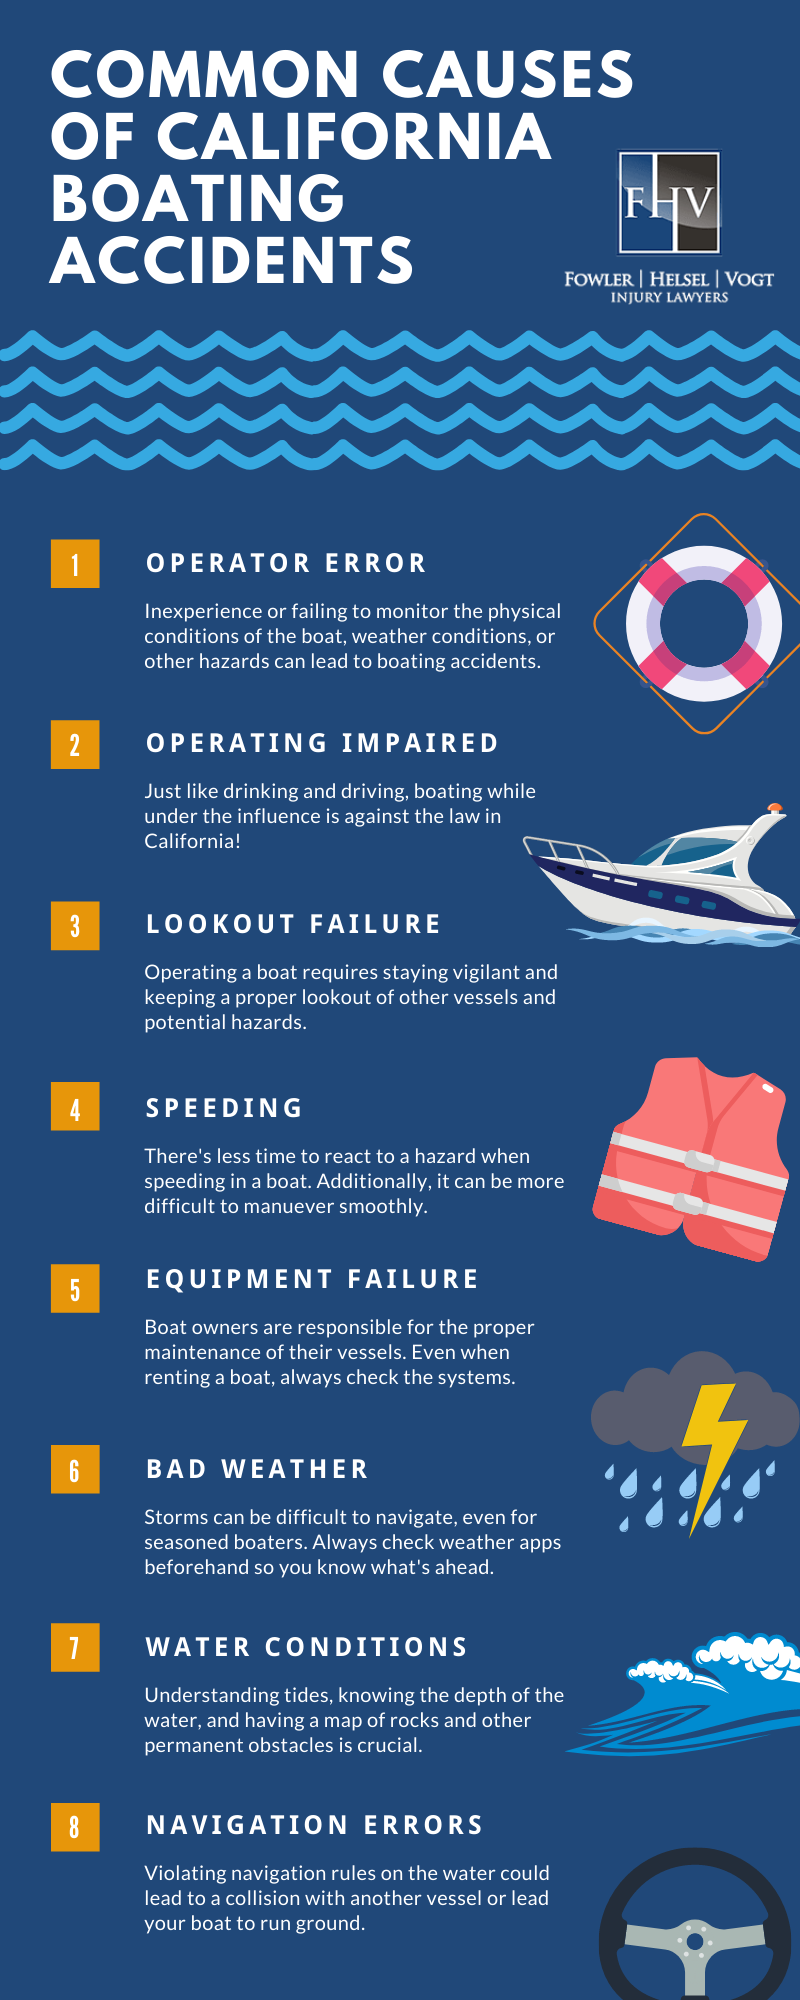 Common causes of boating accidents in California infographic